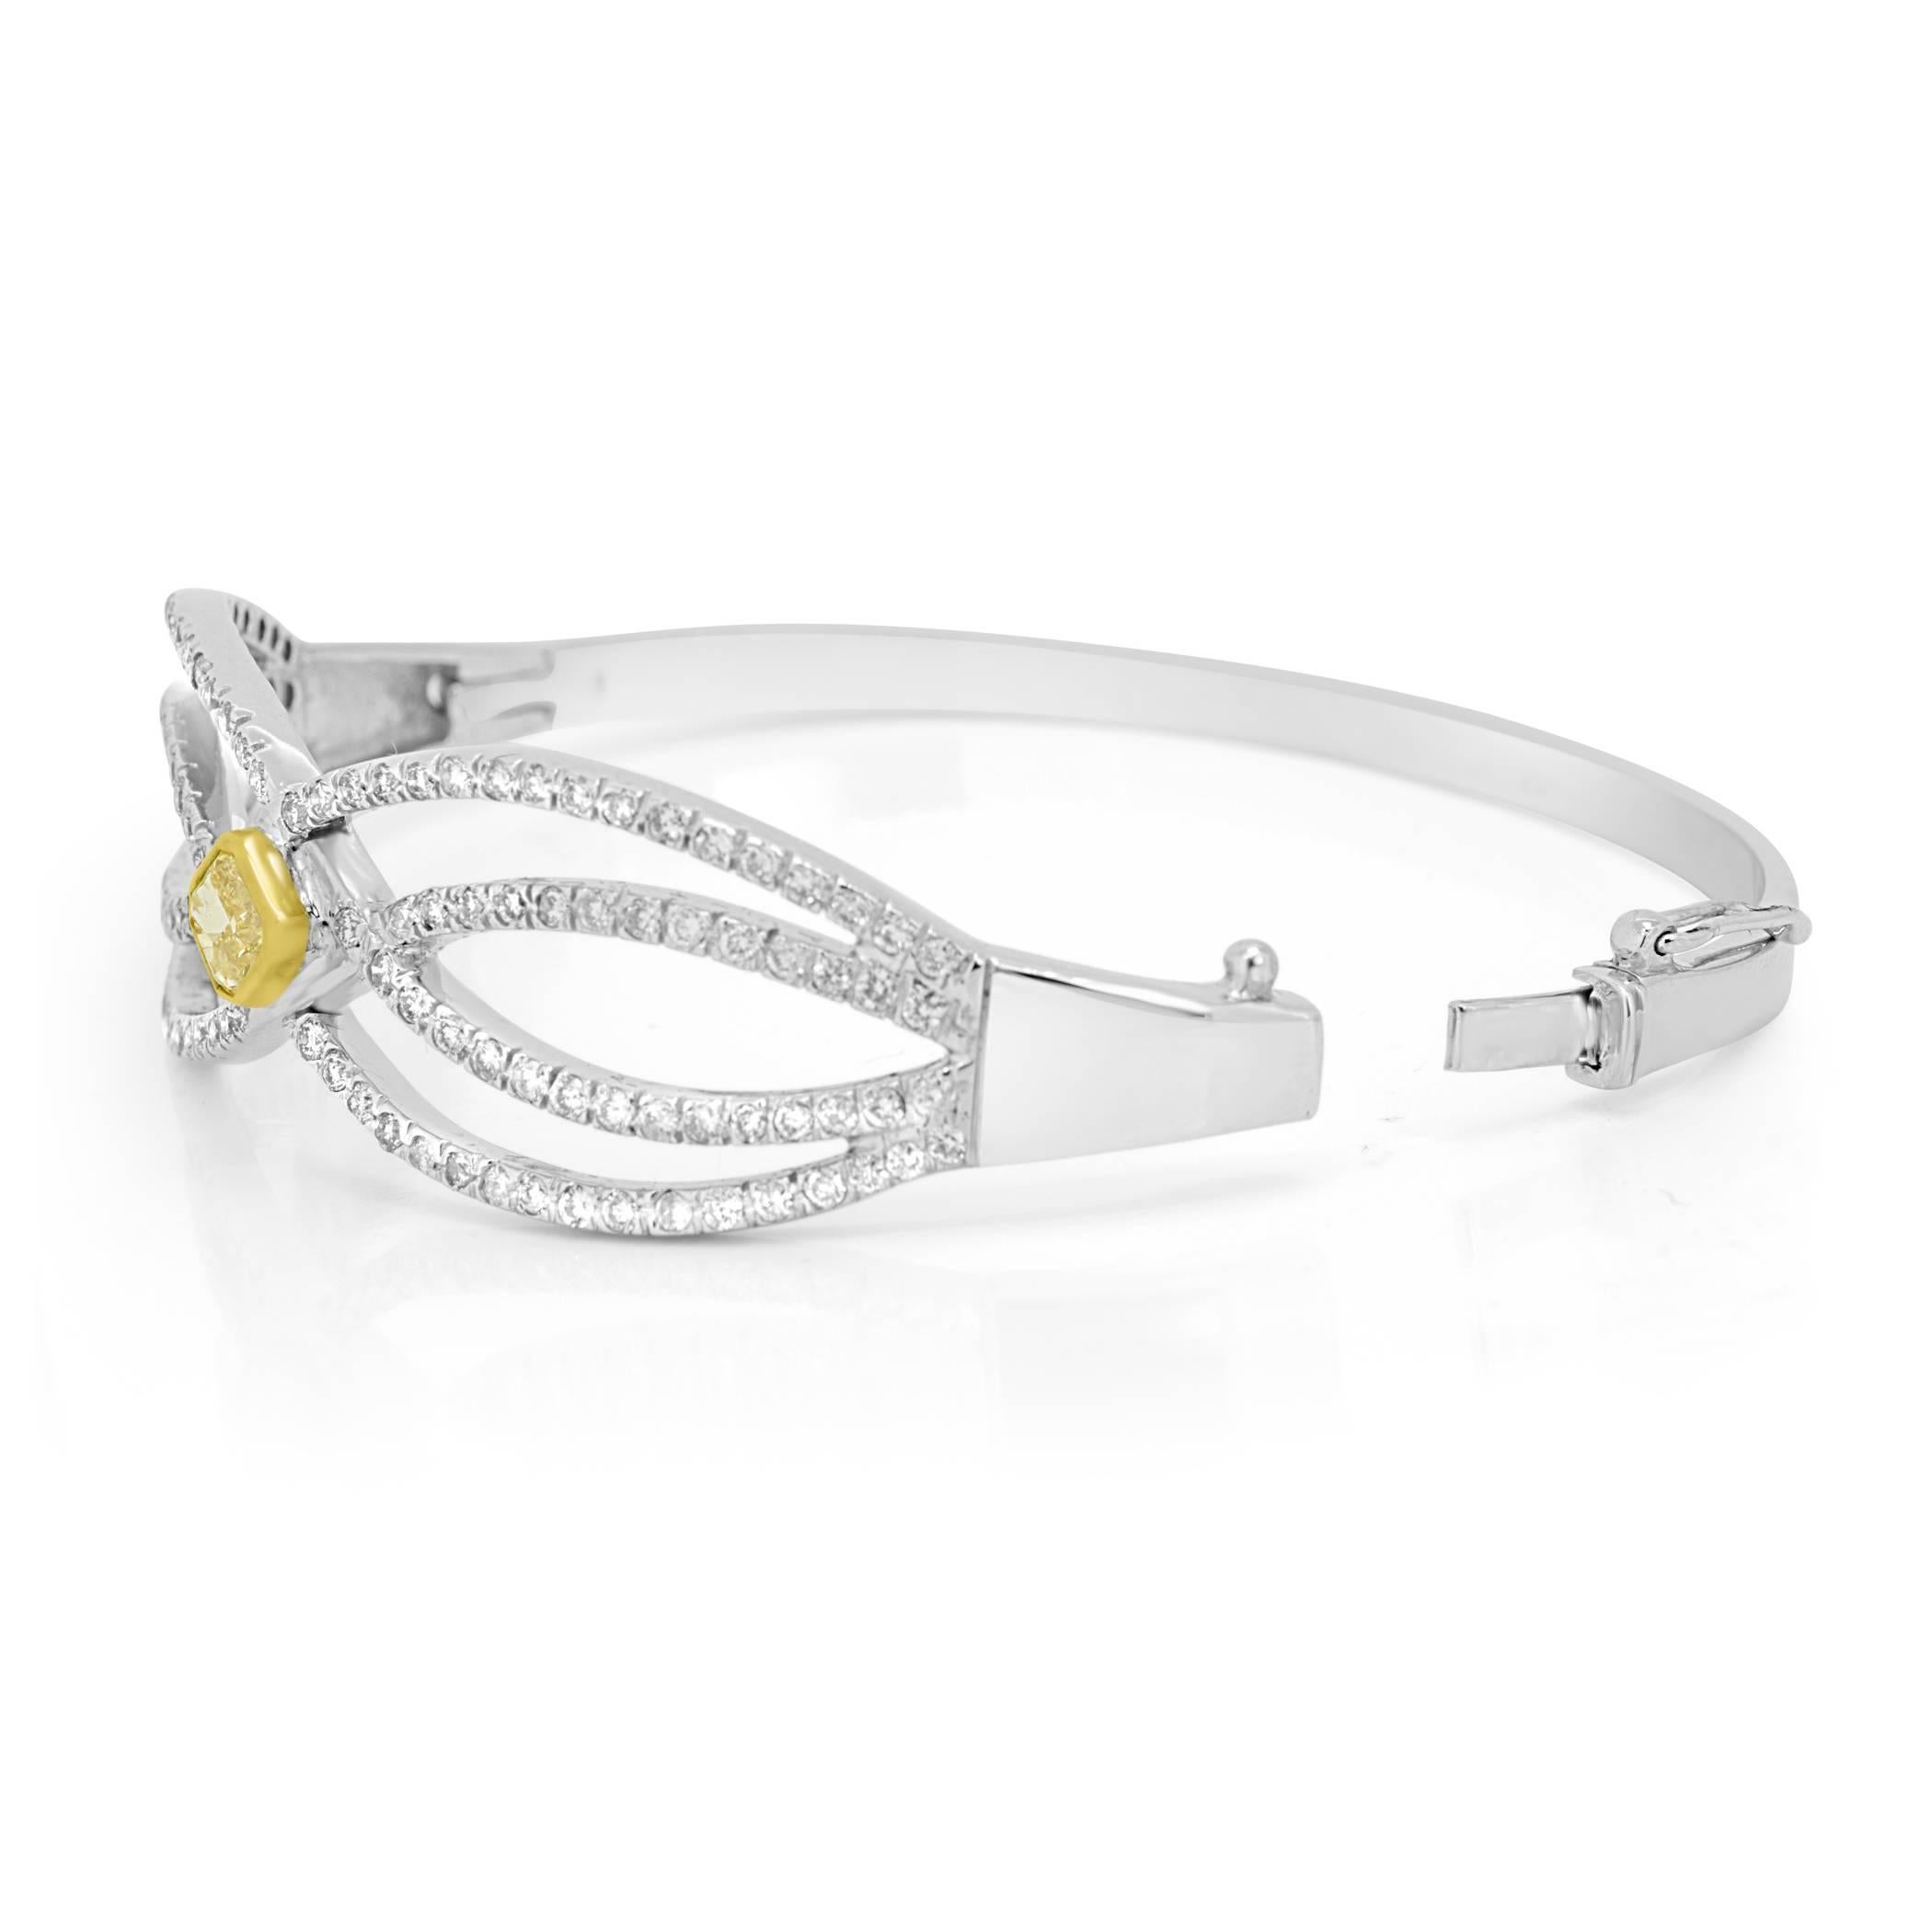 Natural Fancy Yellow Radiant 0.71 Carat and White Diamond 1.50 Carat in 14k white and yellow gold Bangle bracelet.